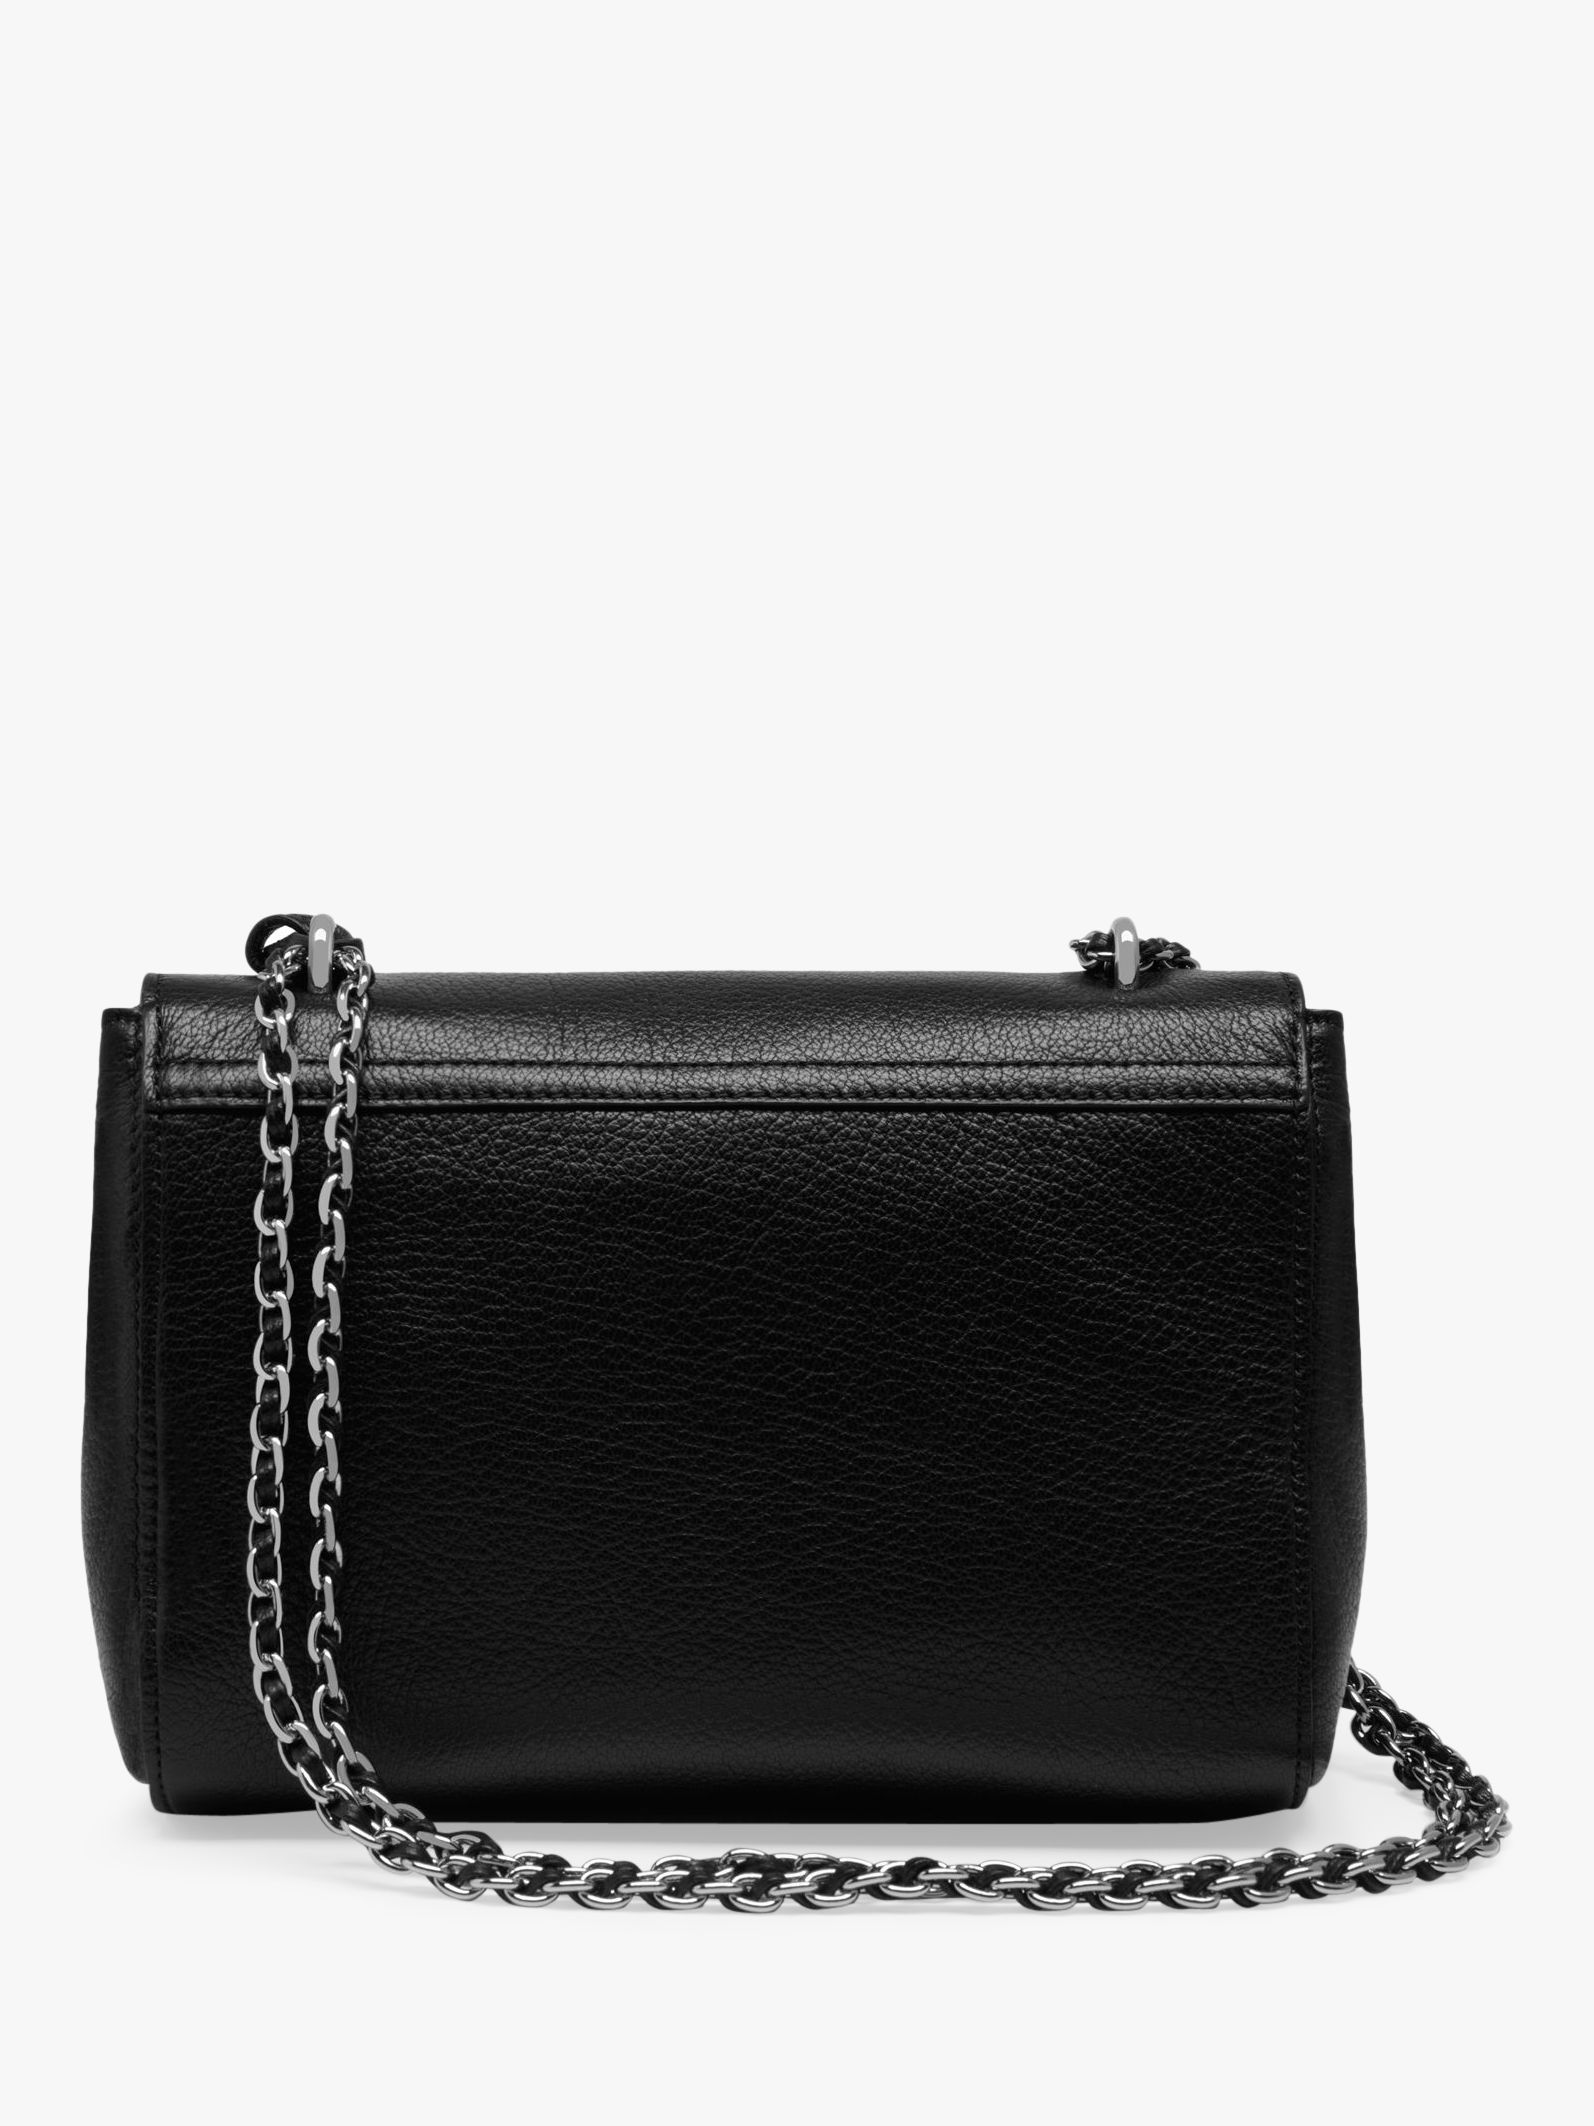 Mulberry Lily Glossy Goat Leather Shoulder Bag, Black/Silver at John ...